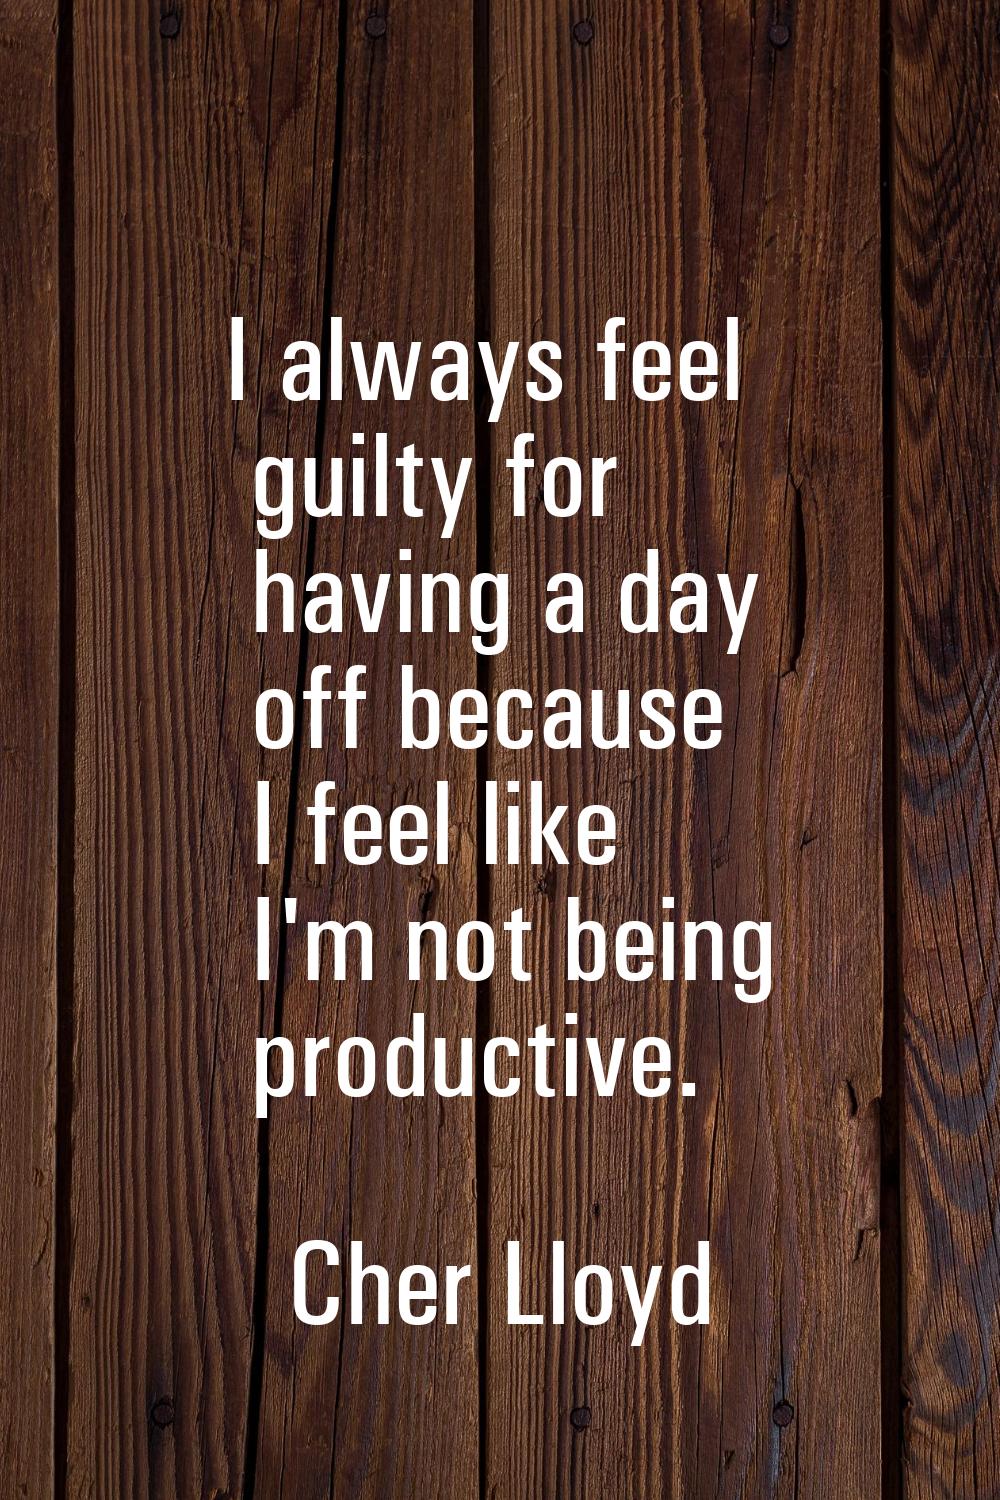 I always feel guilty for having a day off because I feel like I'm not being productive.